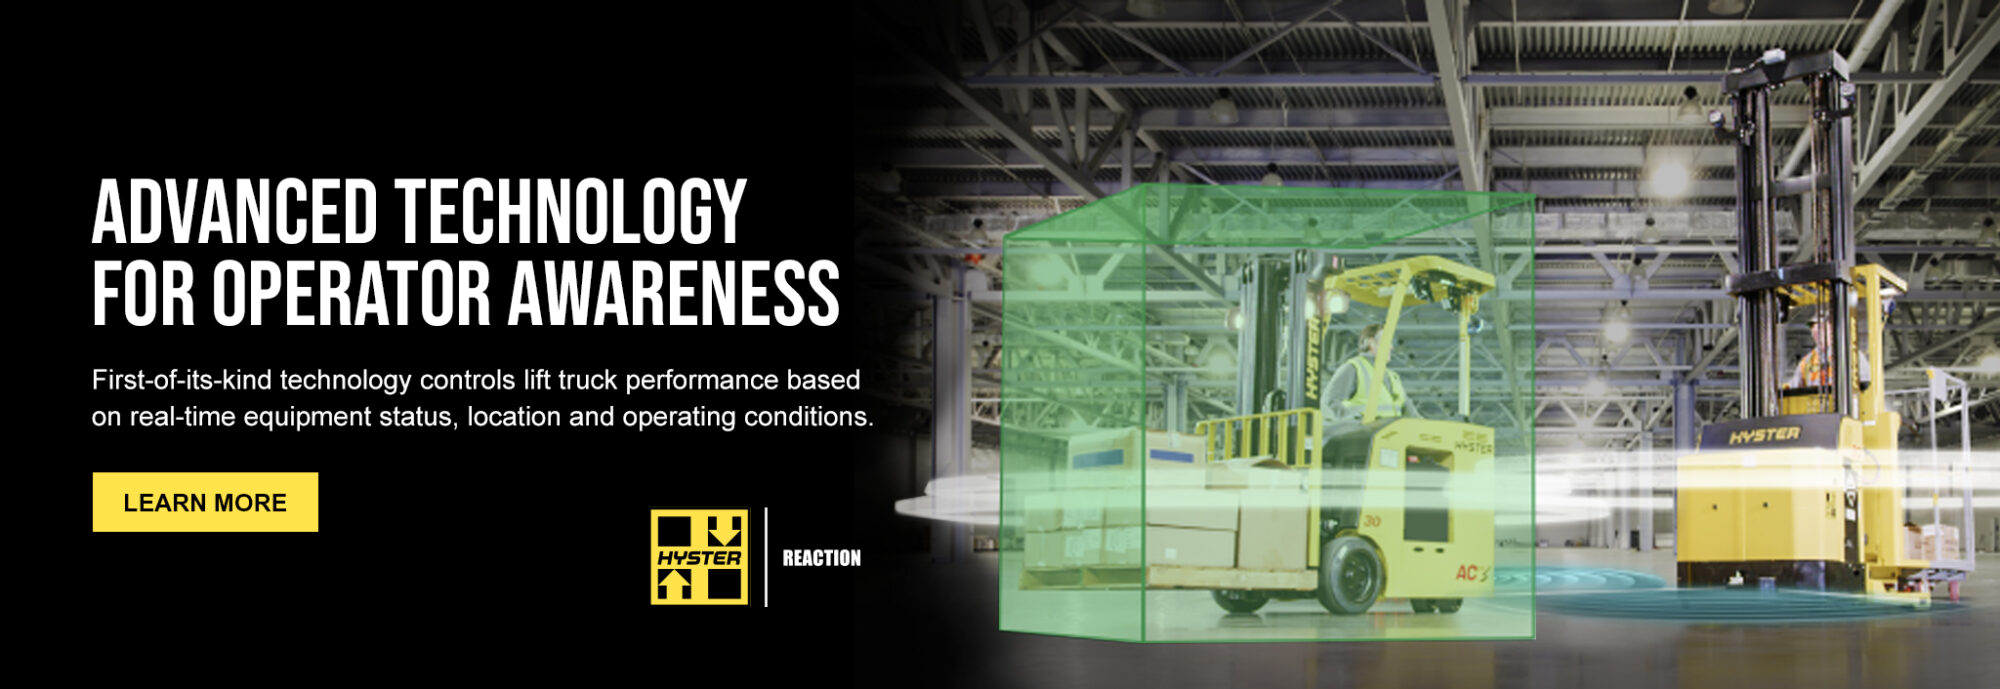 Hyster Reaction Promo Banner